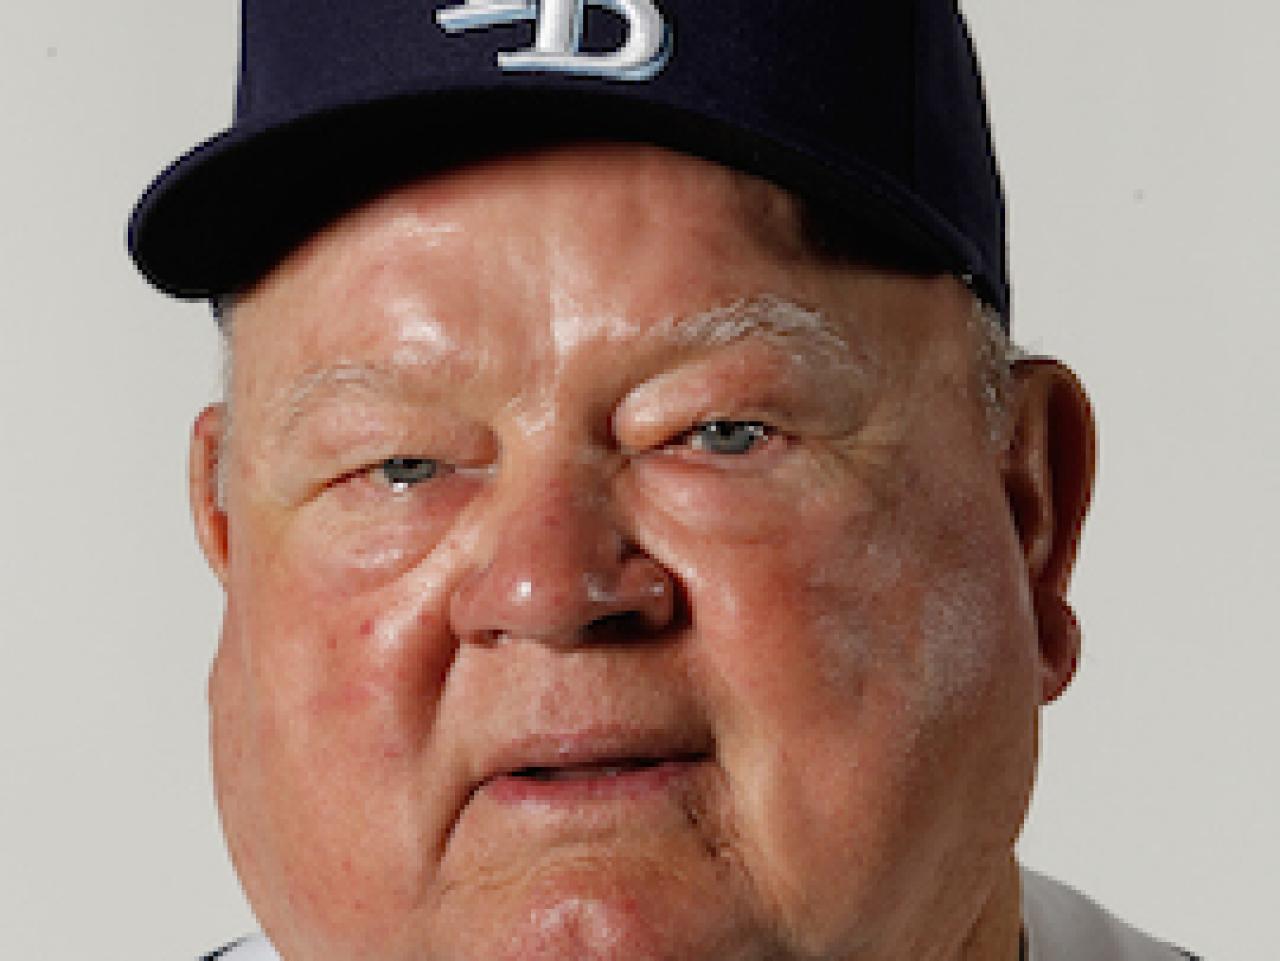 Don Zimmer: His was a baseball life that made ample room for golf